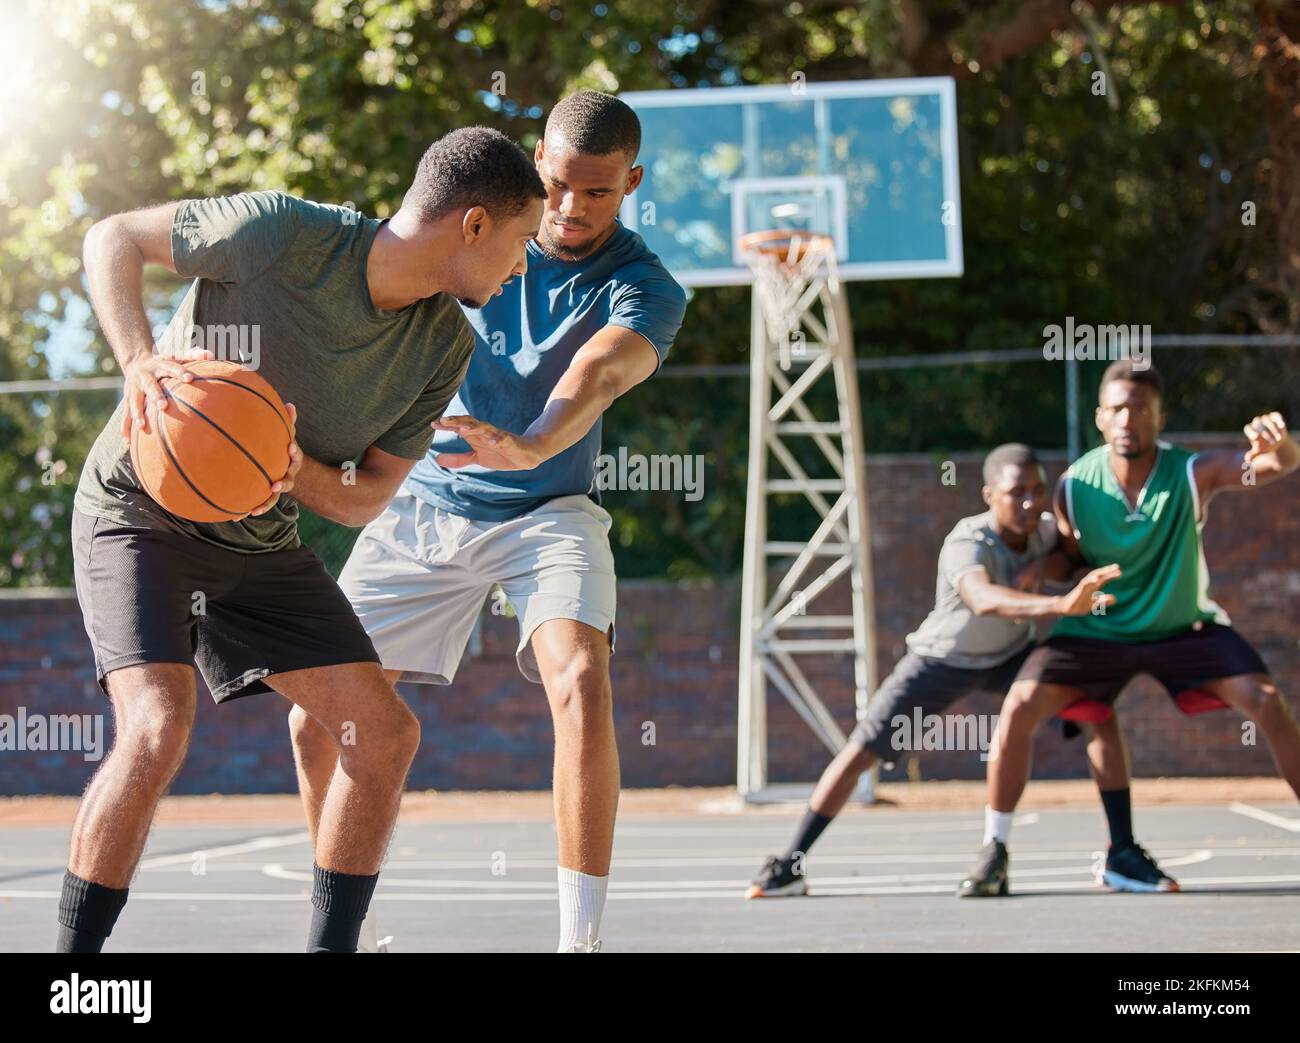 Basketball, sports and competition with a black man athlete playing a game on a court with friends or a rival. Team, fitness and health with a male Stock Photo